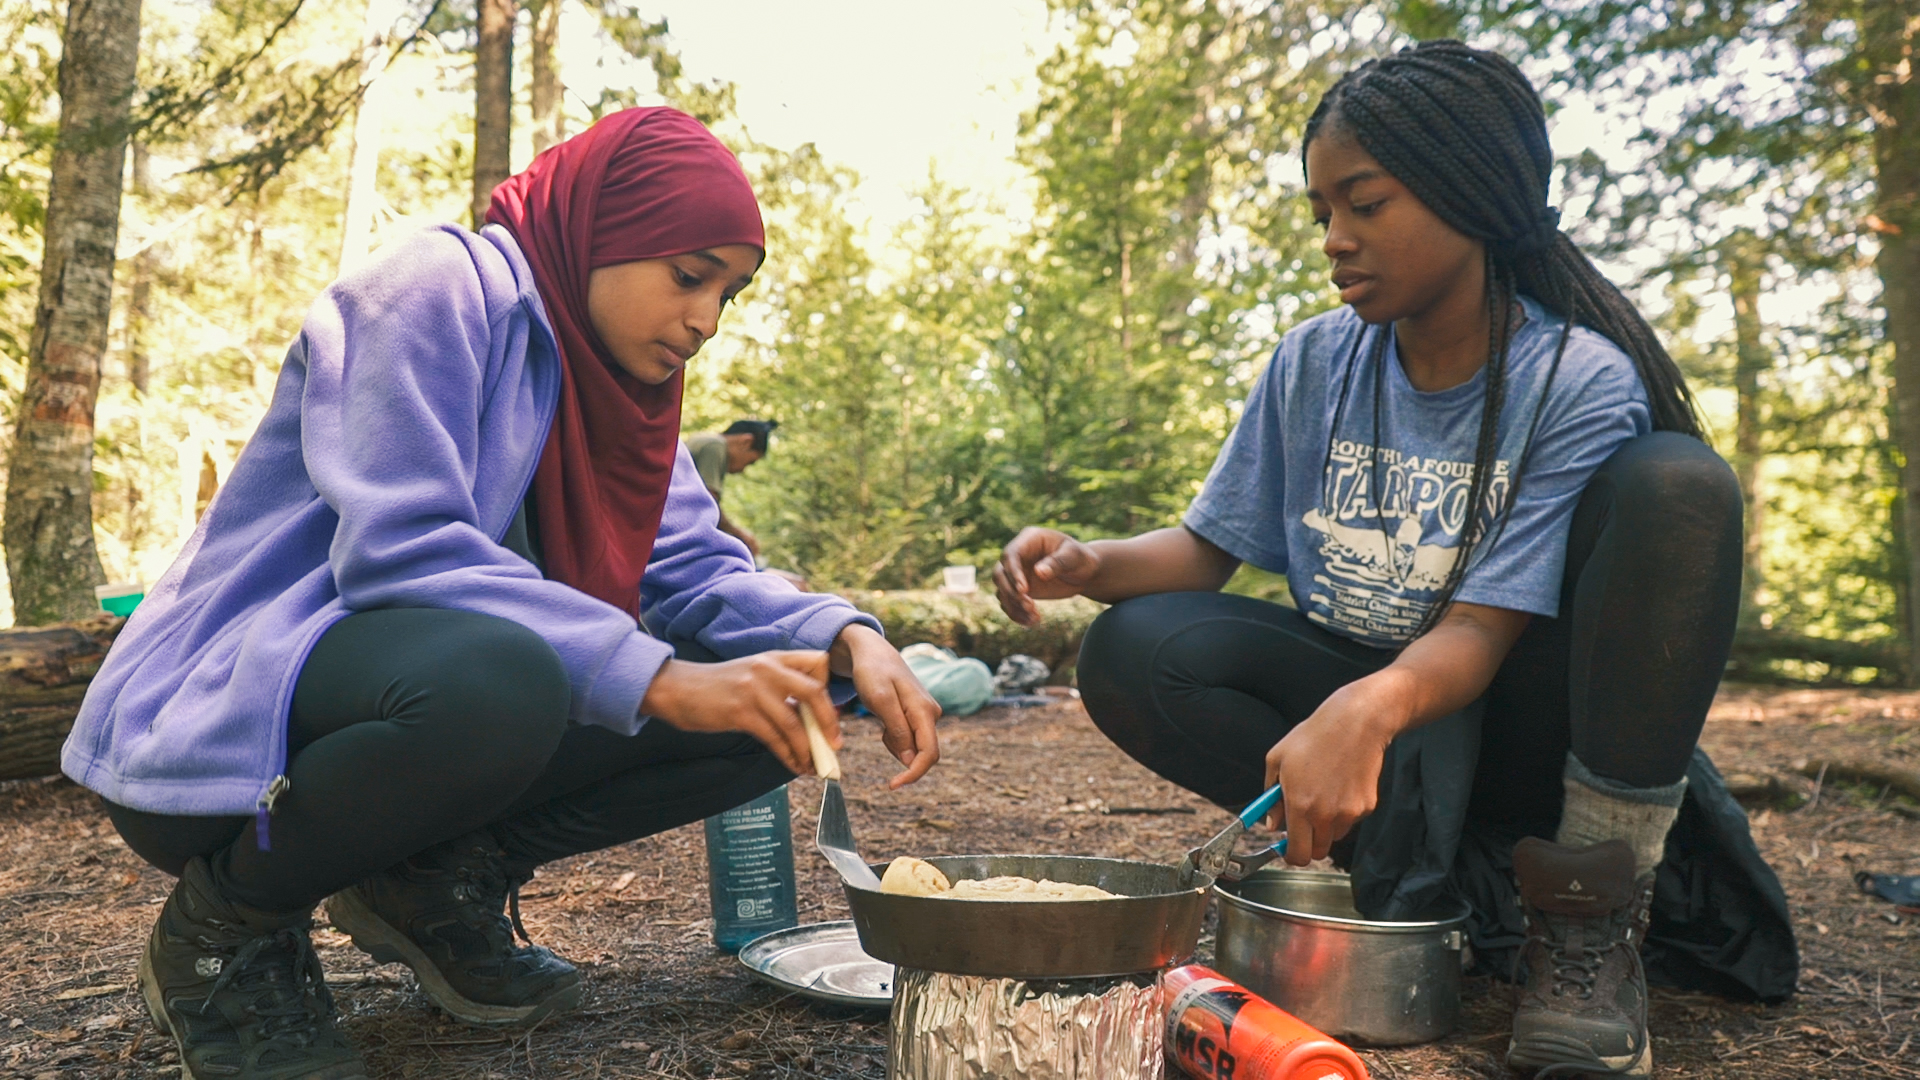 NOLS students learn outdoor cooking skills while camping in the Adirondack Forest Preserve (Photo by Kirk Rasmussen/NOLS)